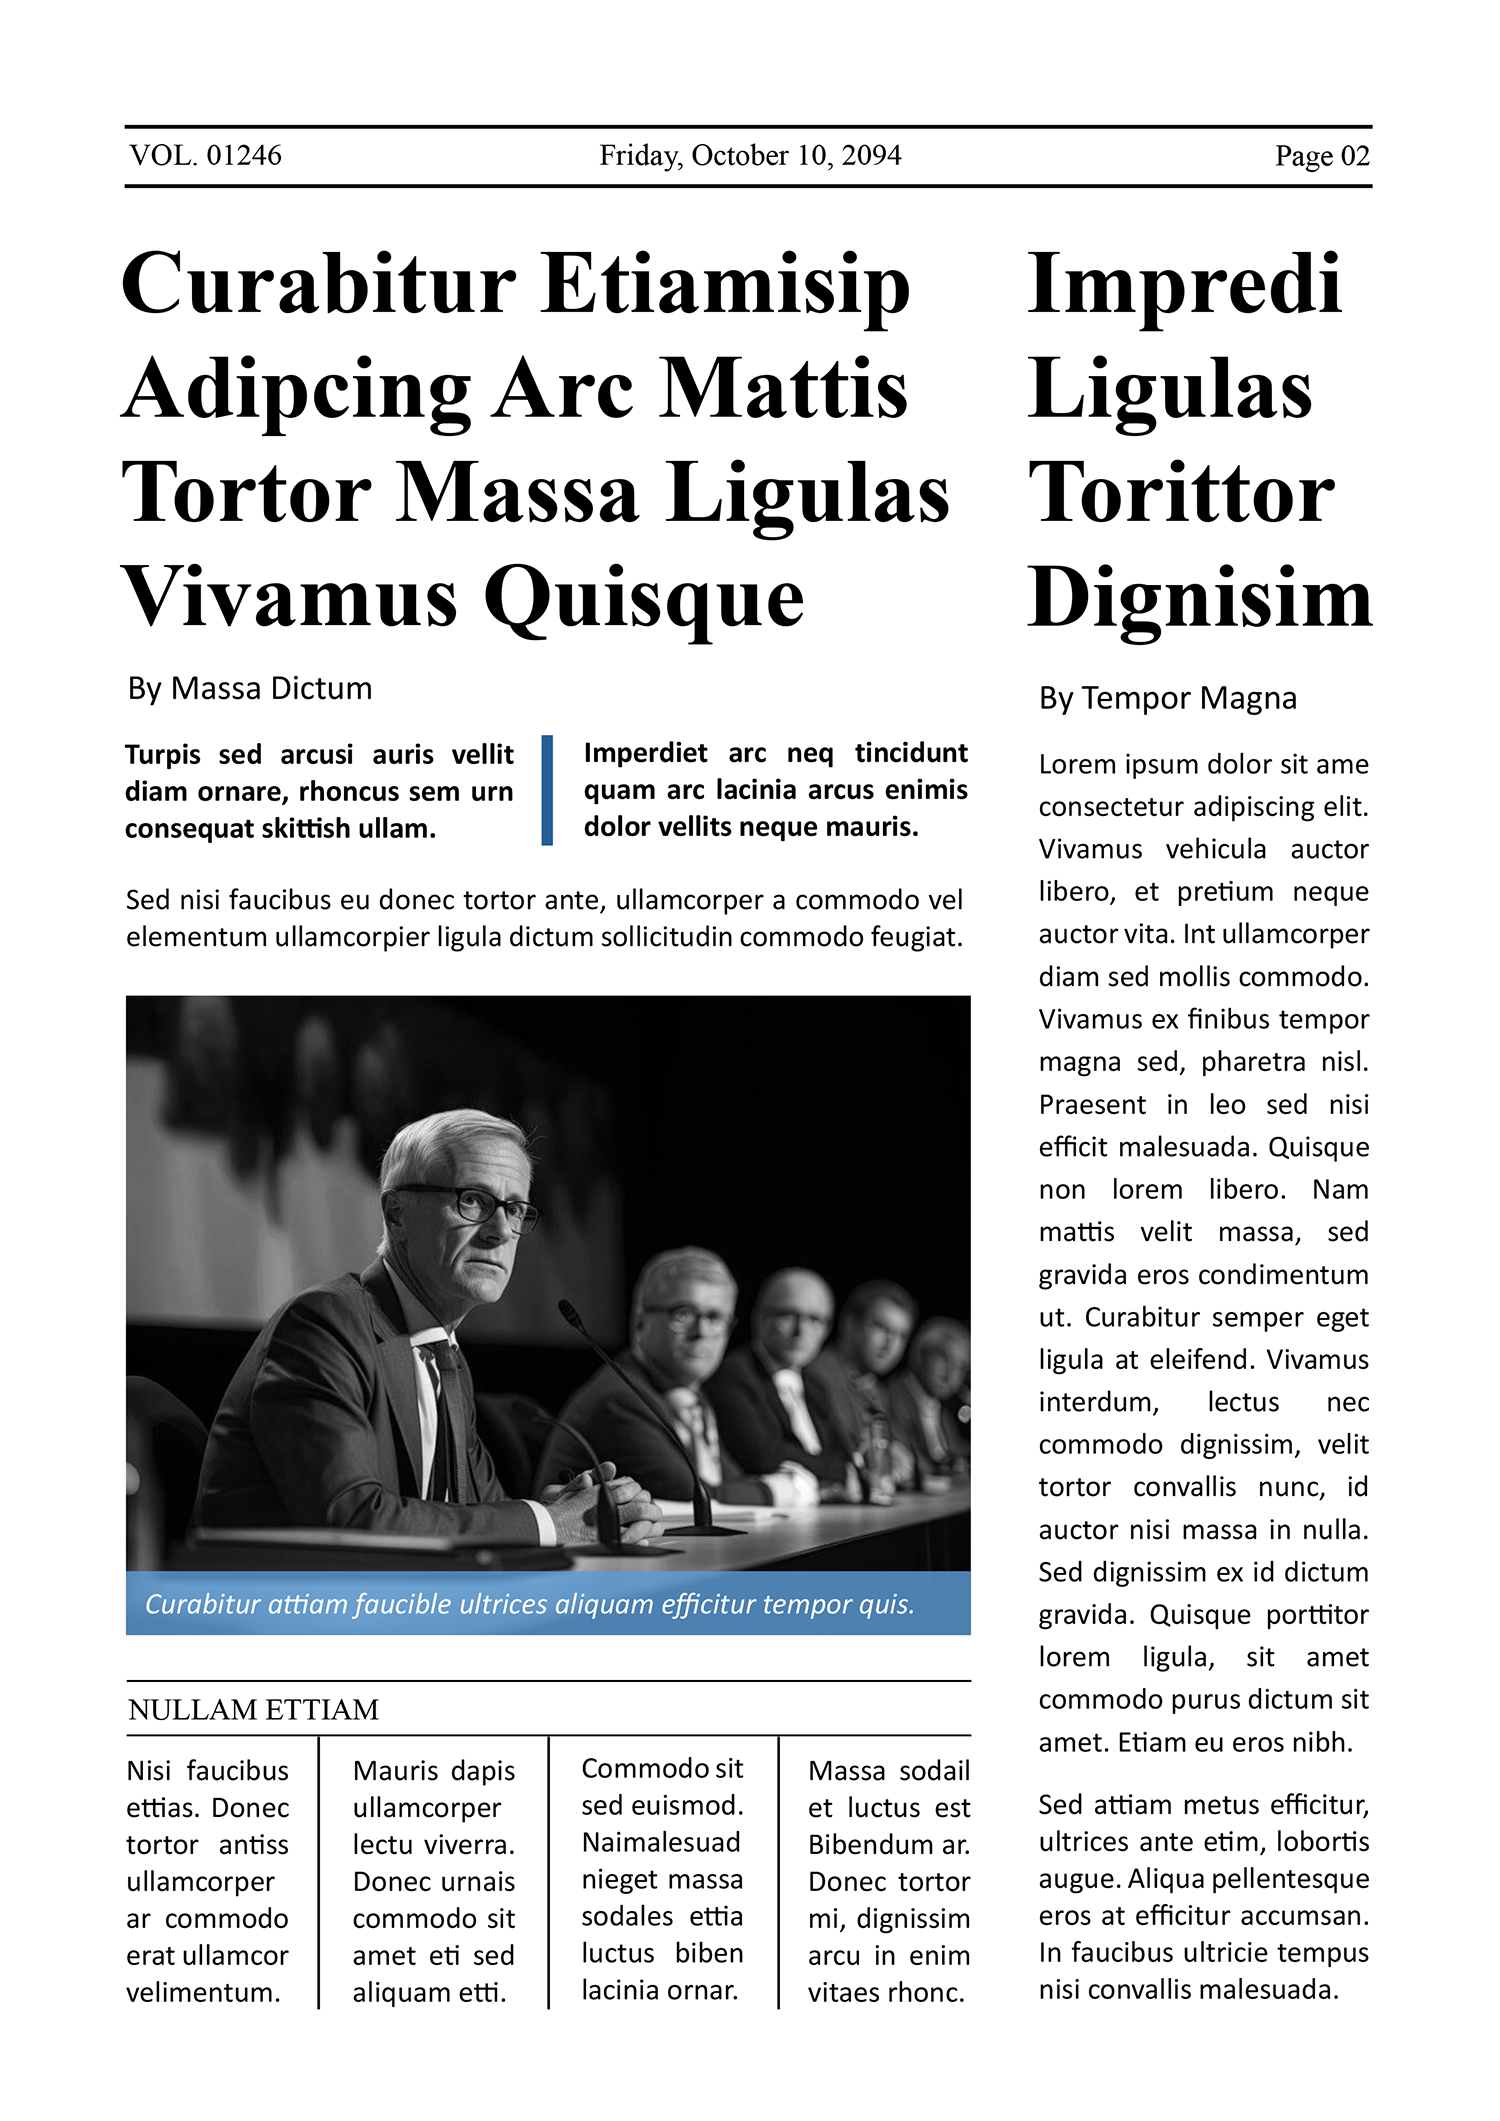 Classy Newspaper Front Page Template - Page 02